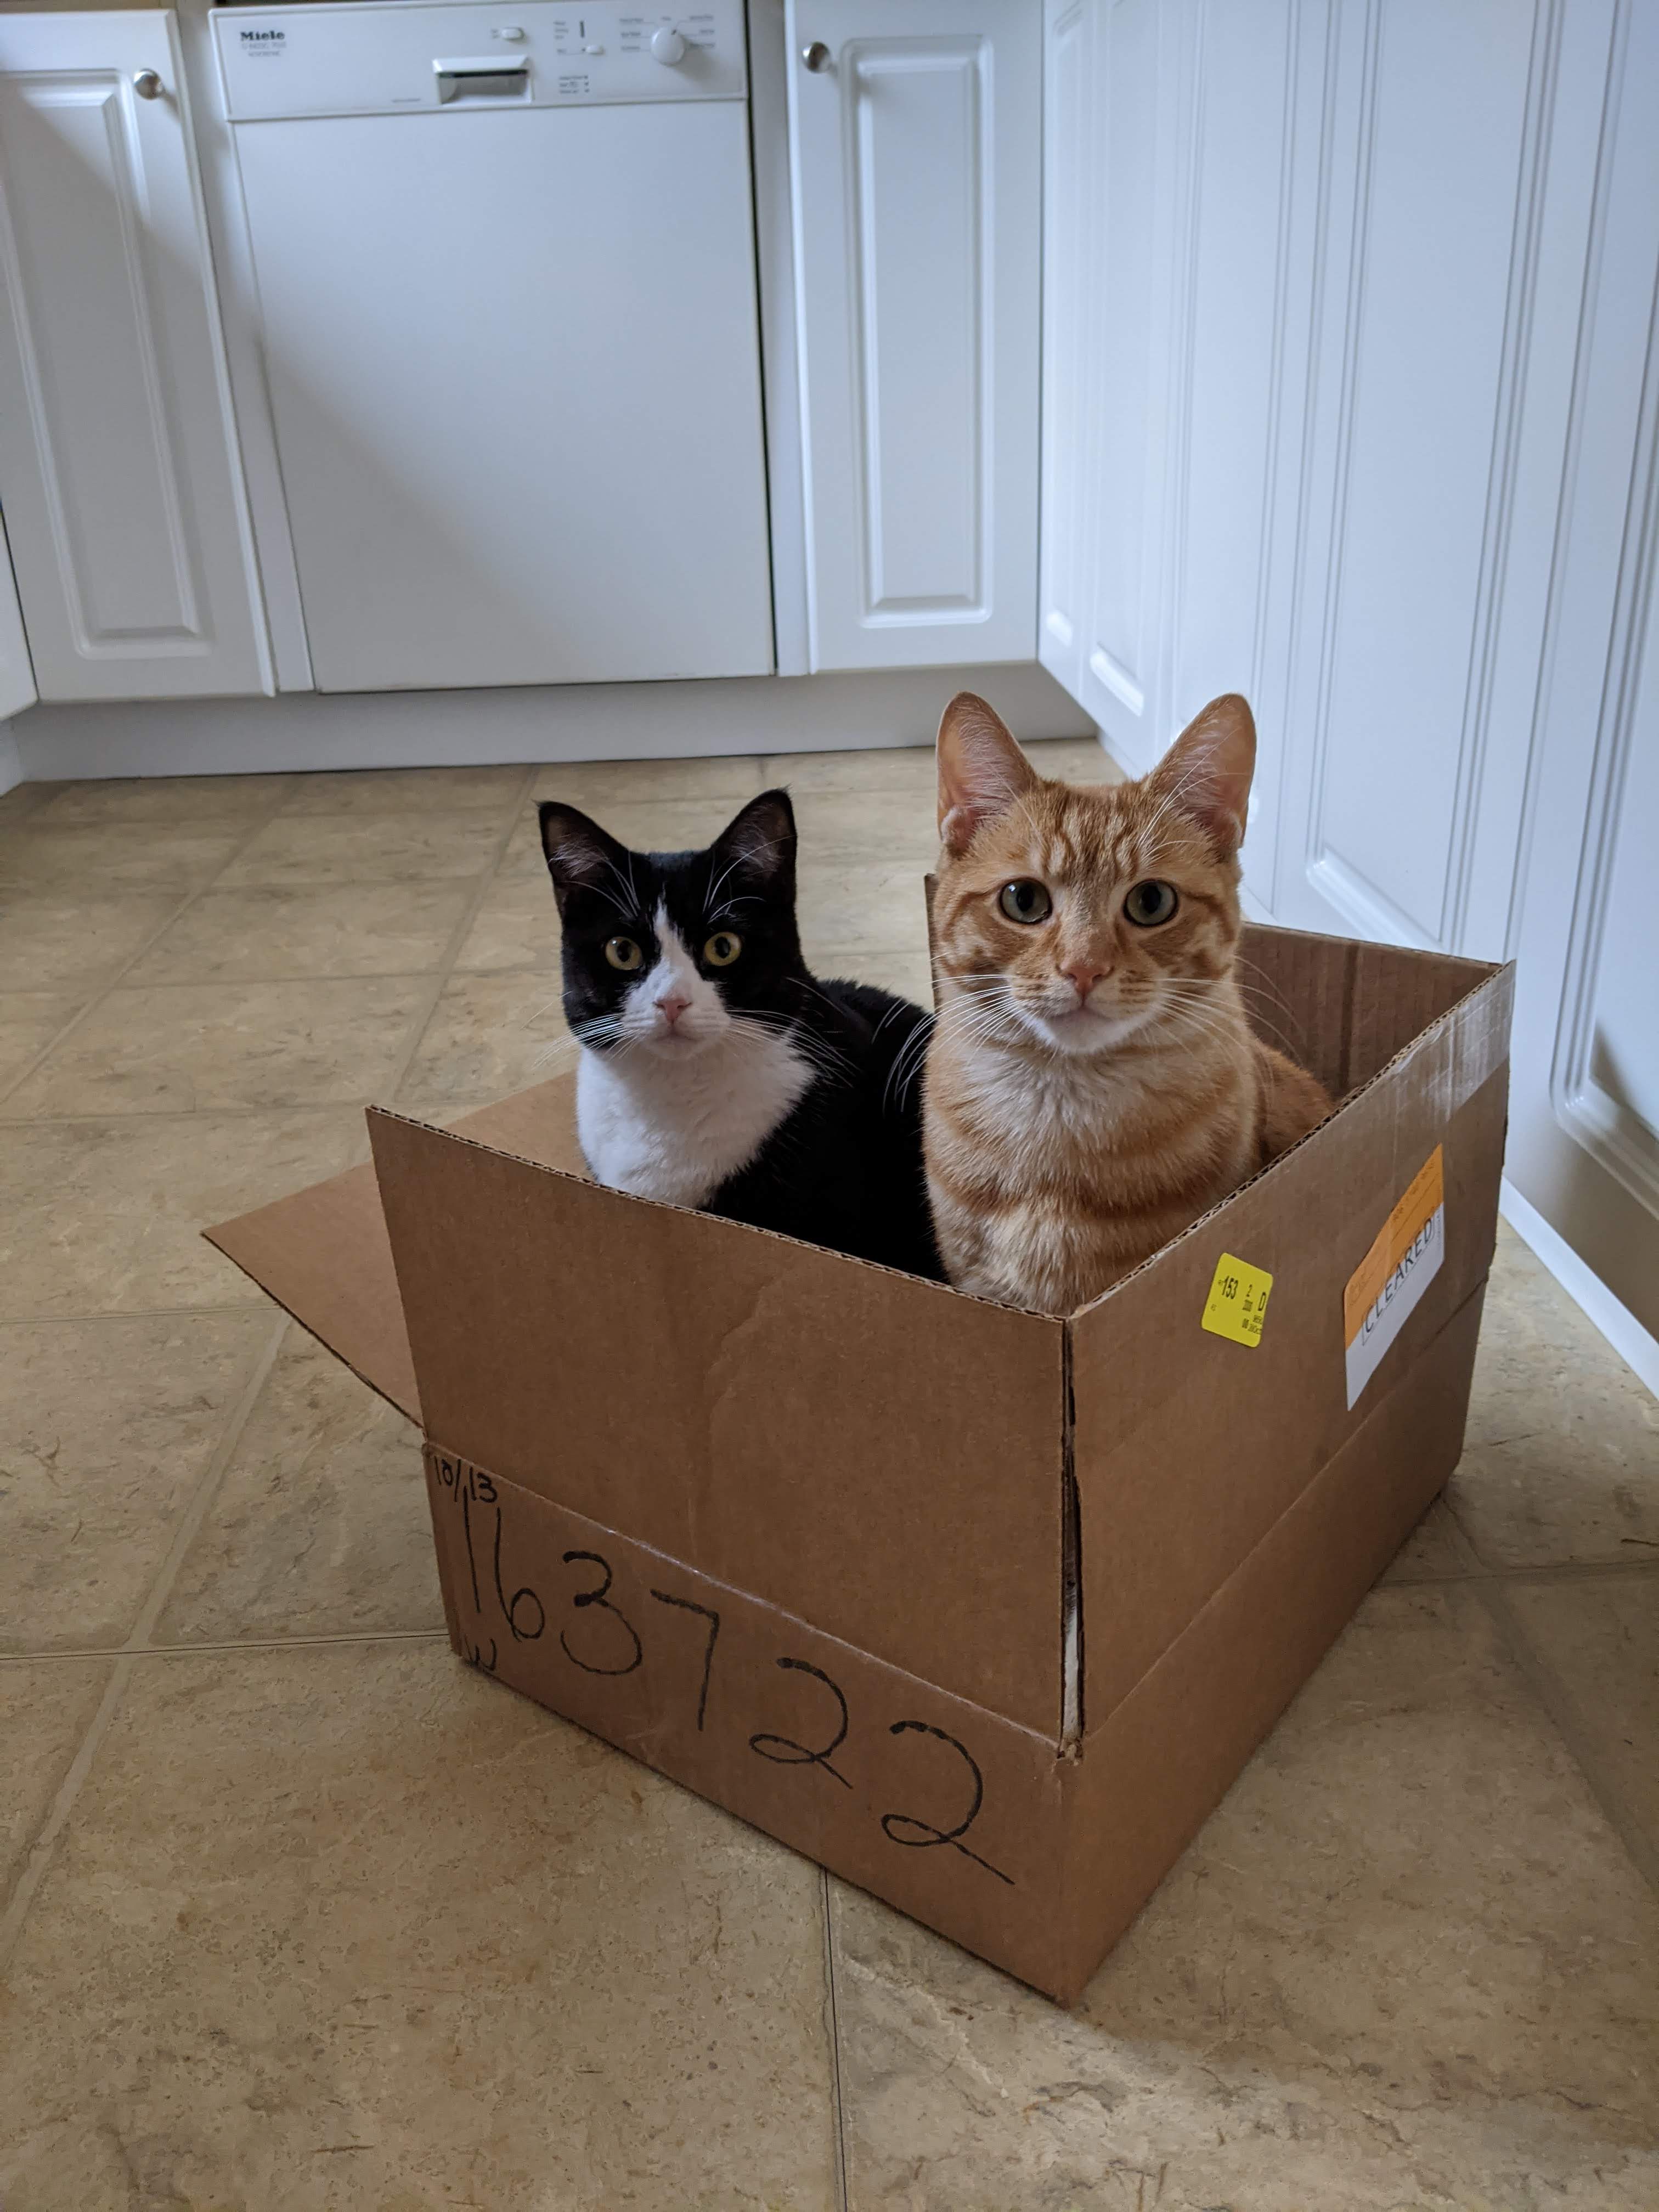 Cats Agnes and Lloyd sitting in a box